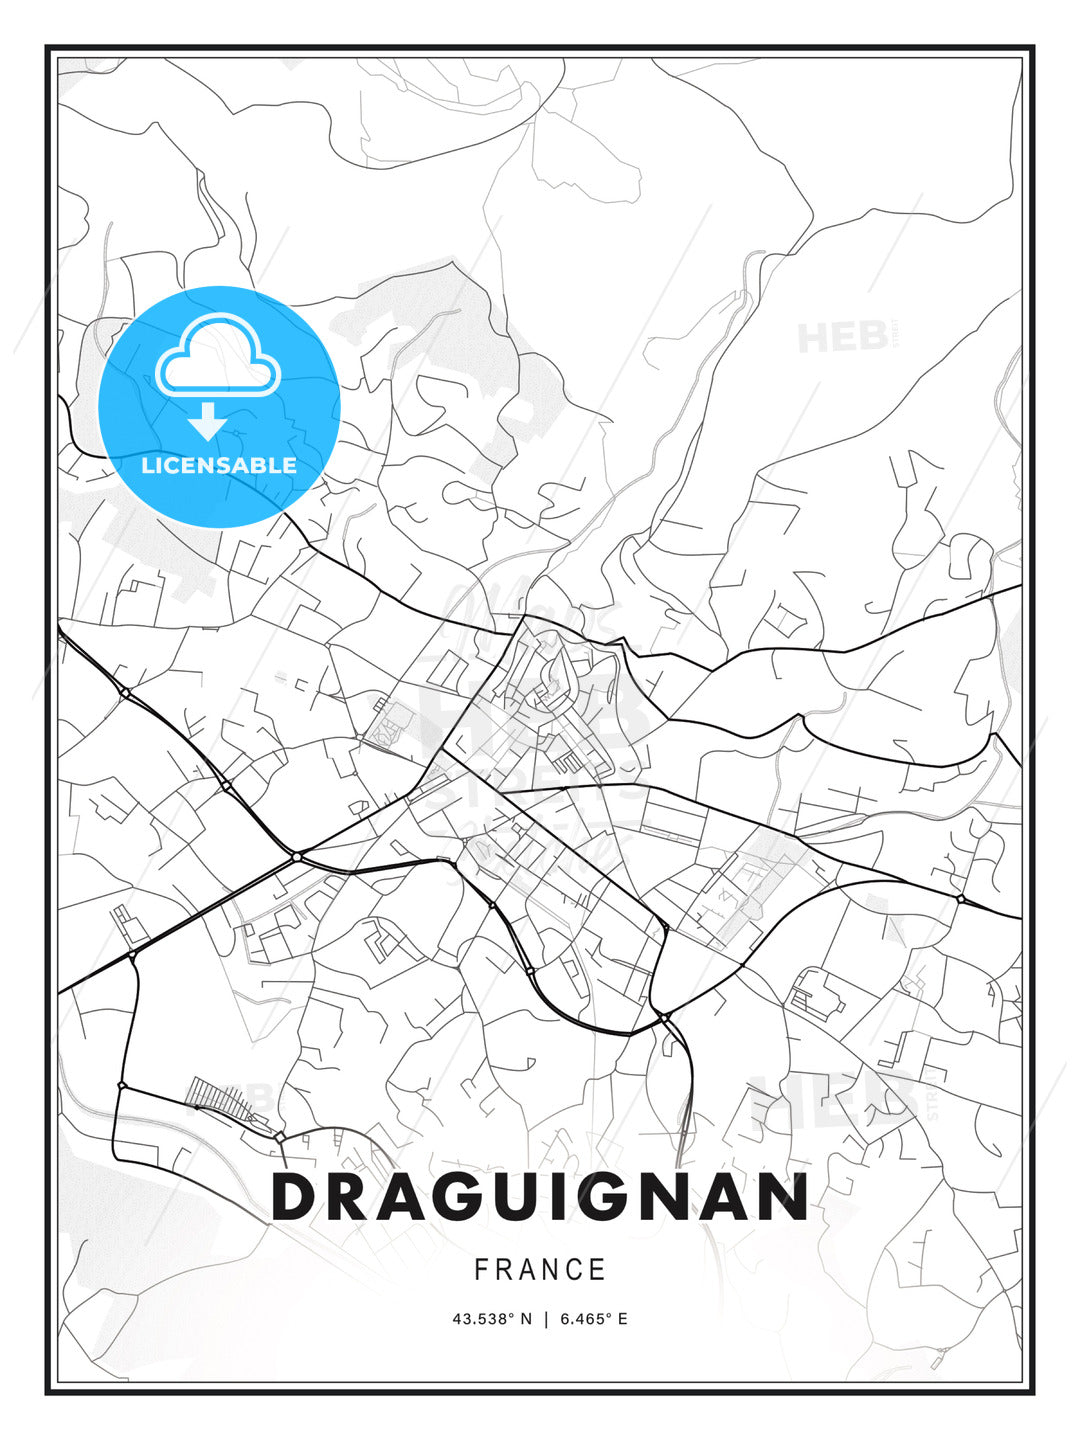 Draguignan, France, Modern Print Template in Various Formats - HEBSTREITS Sketches